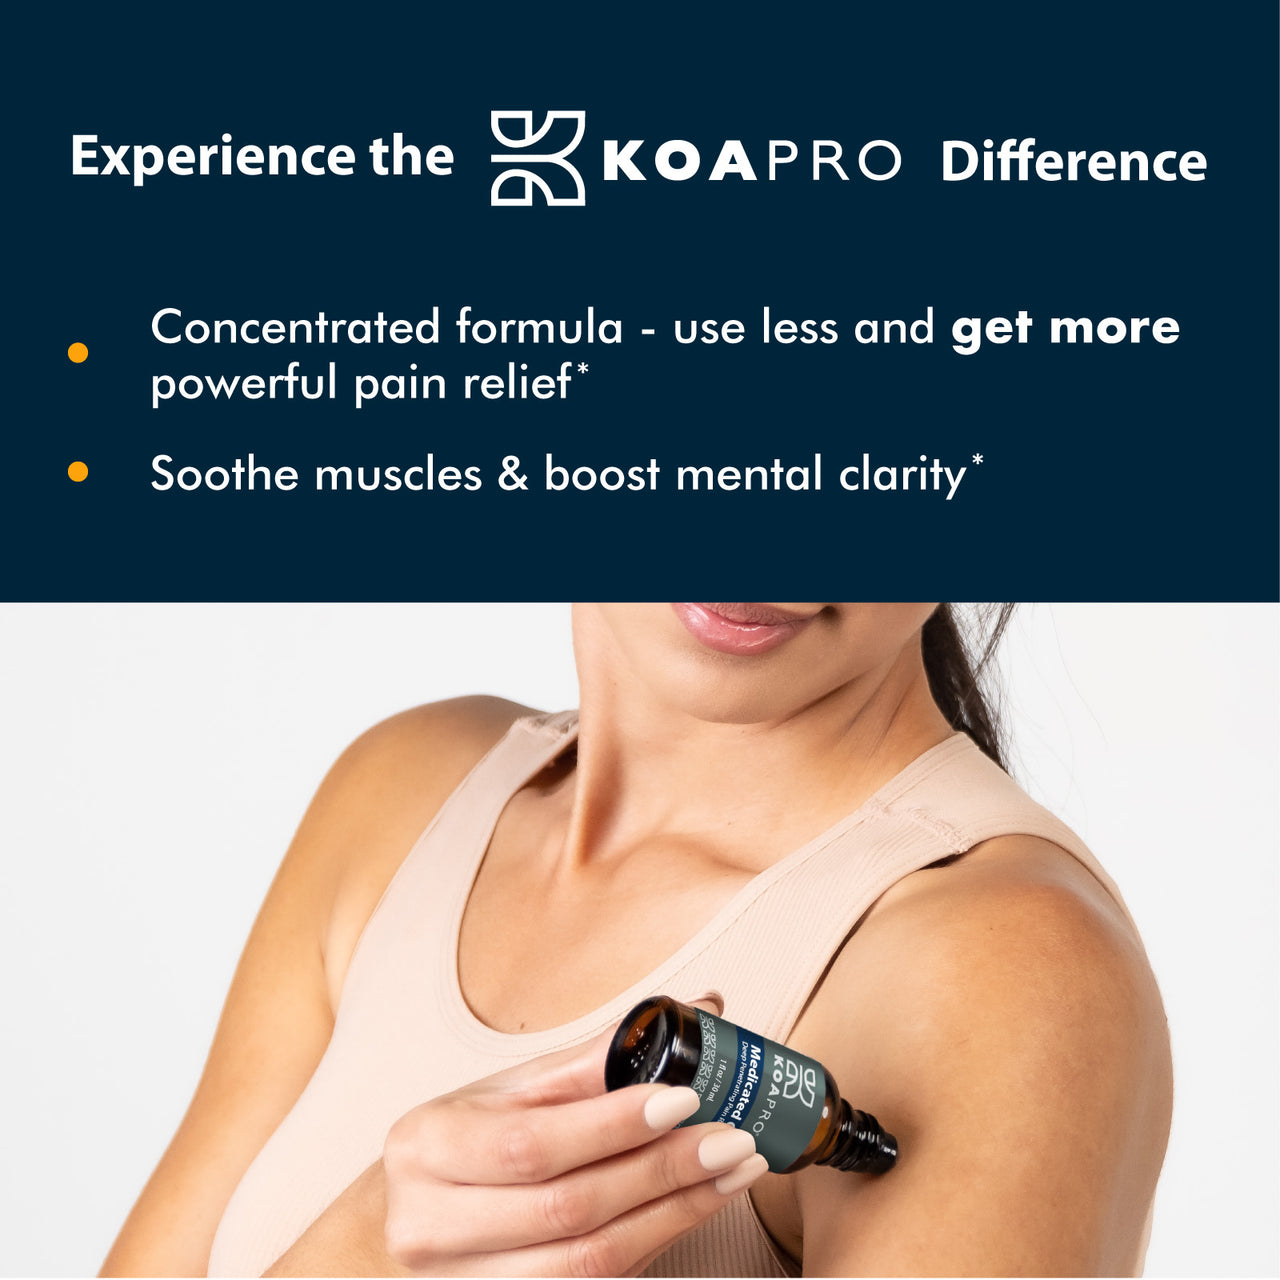 Experience the KOAPRO Difference. Soothe muscles and boost mental clarity.